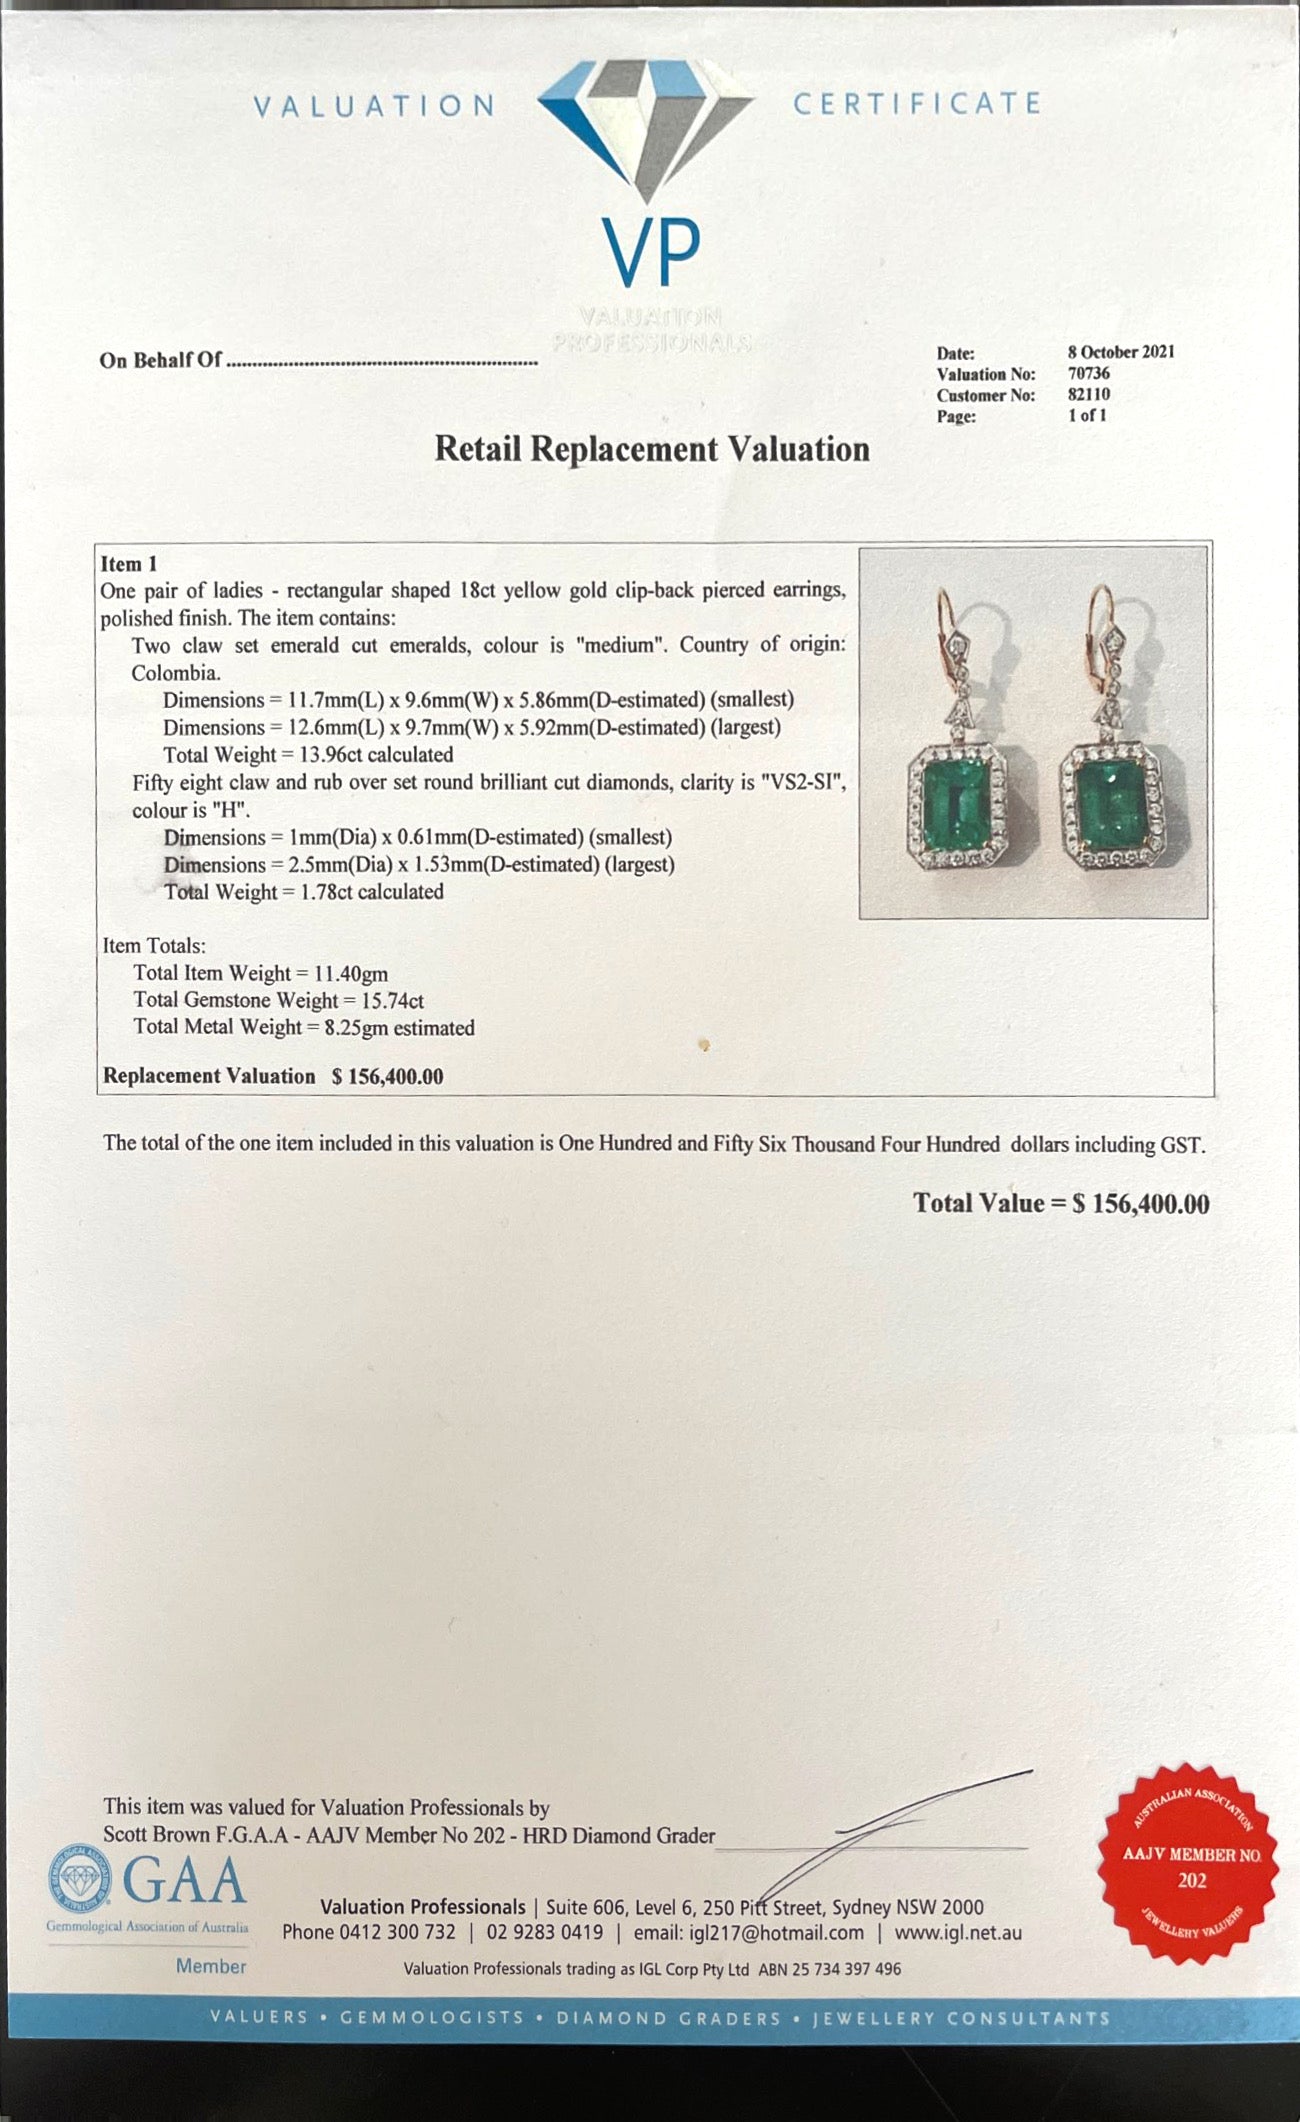 18CT yellow gold Colombian emerald and diamond earrings